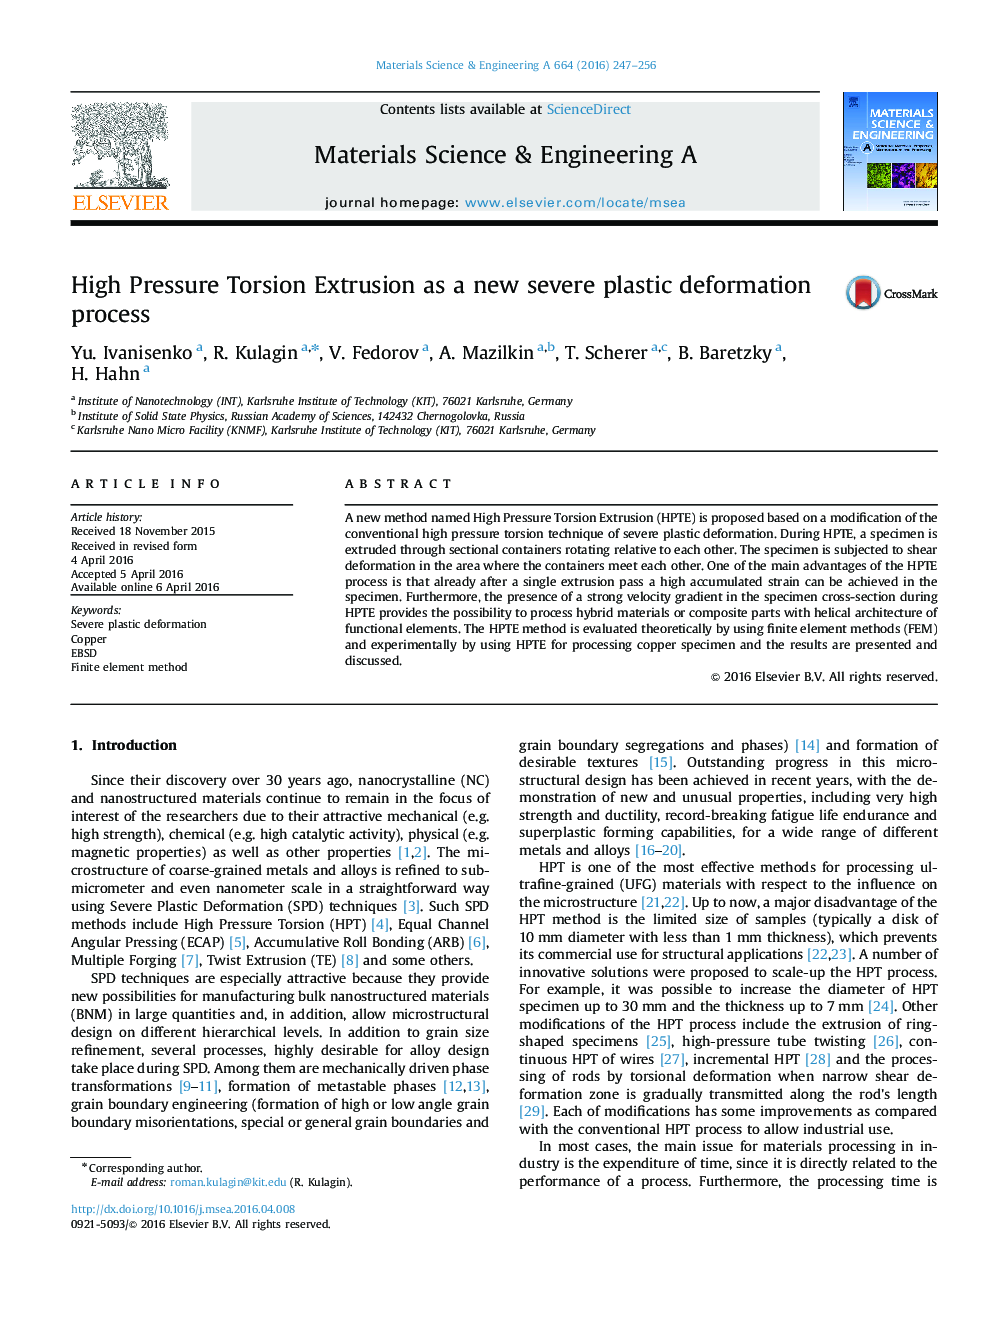 High Pressure Torsion Extrusion as a new severe plastic deformation process